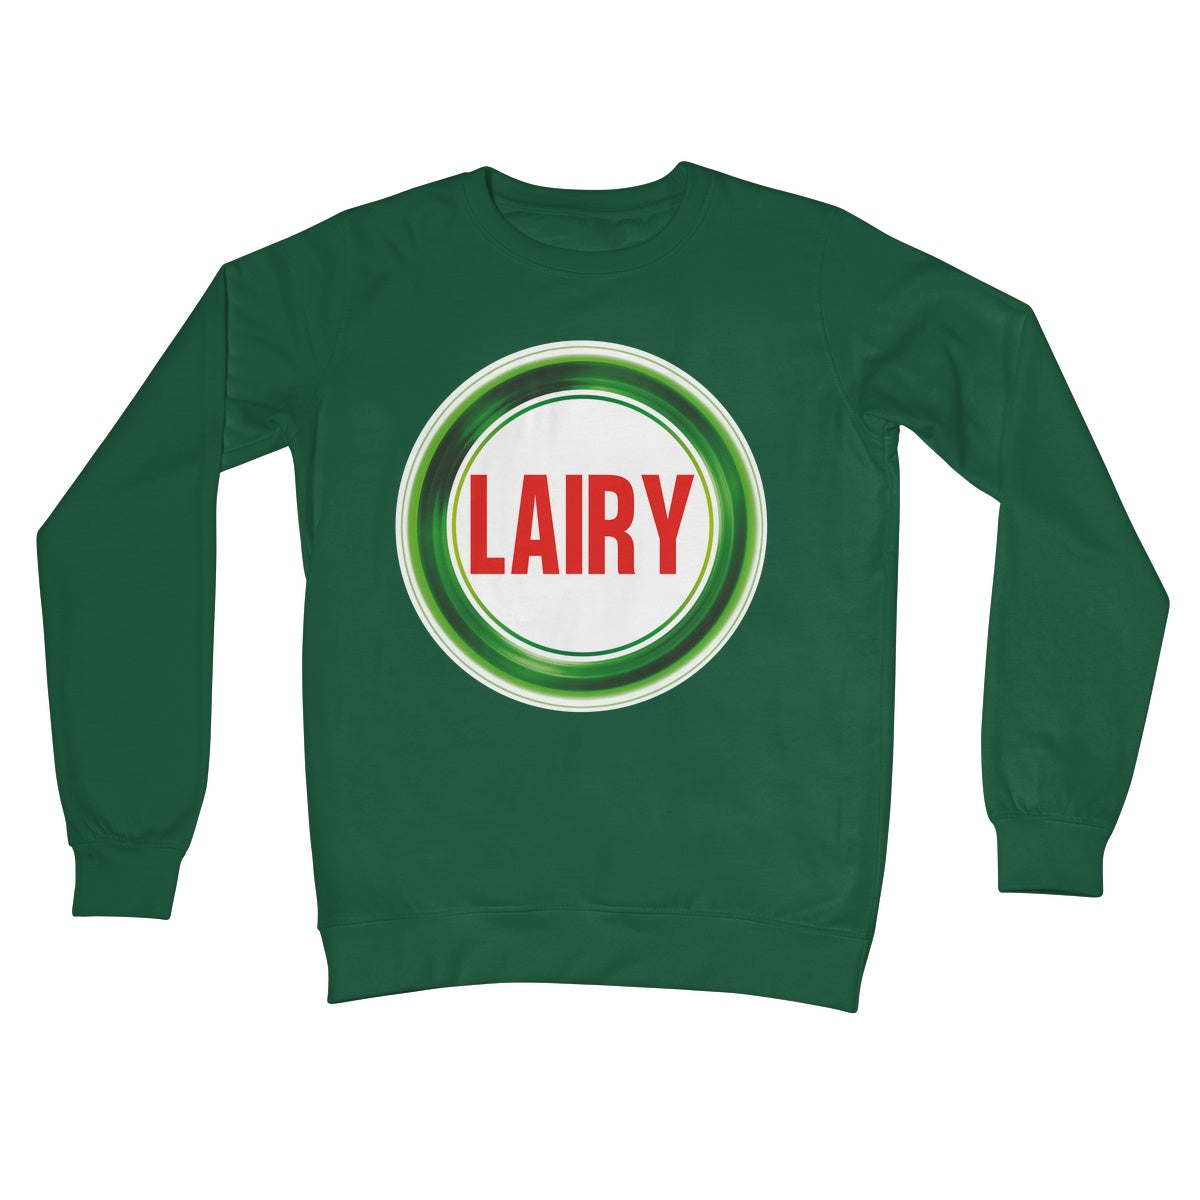 lairy jumper green